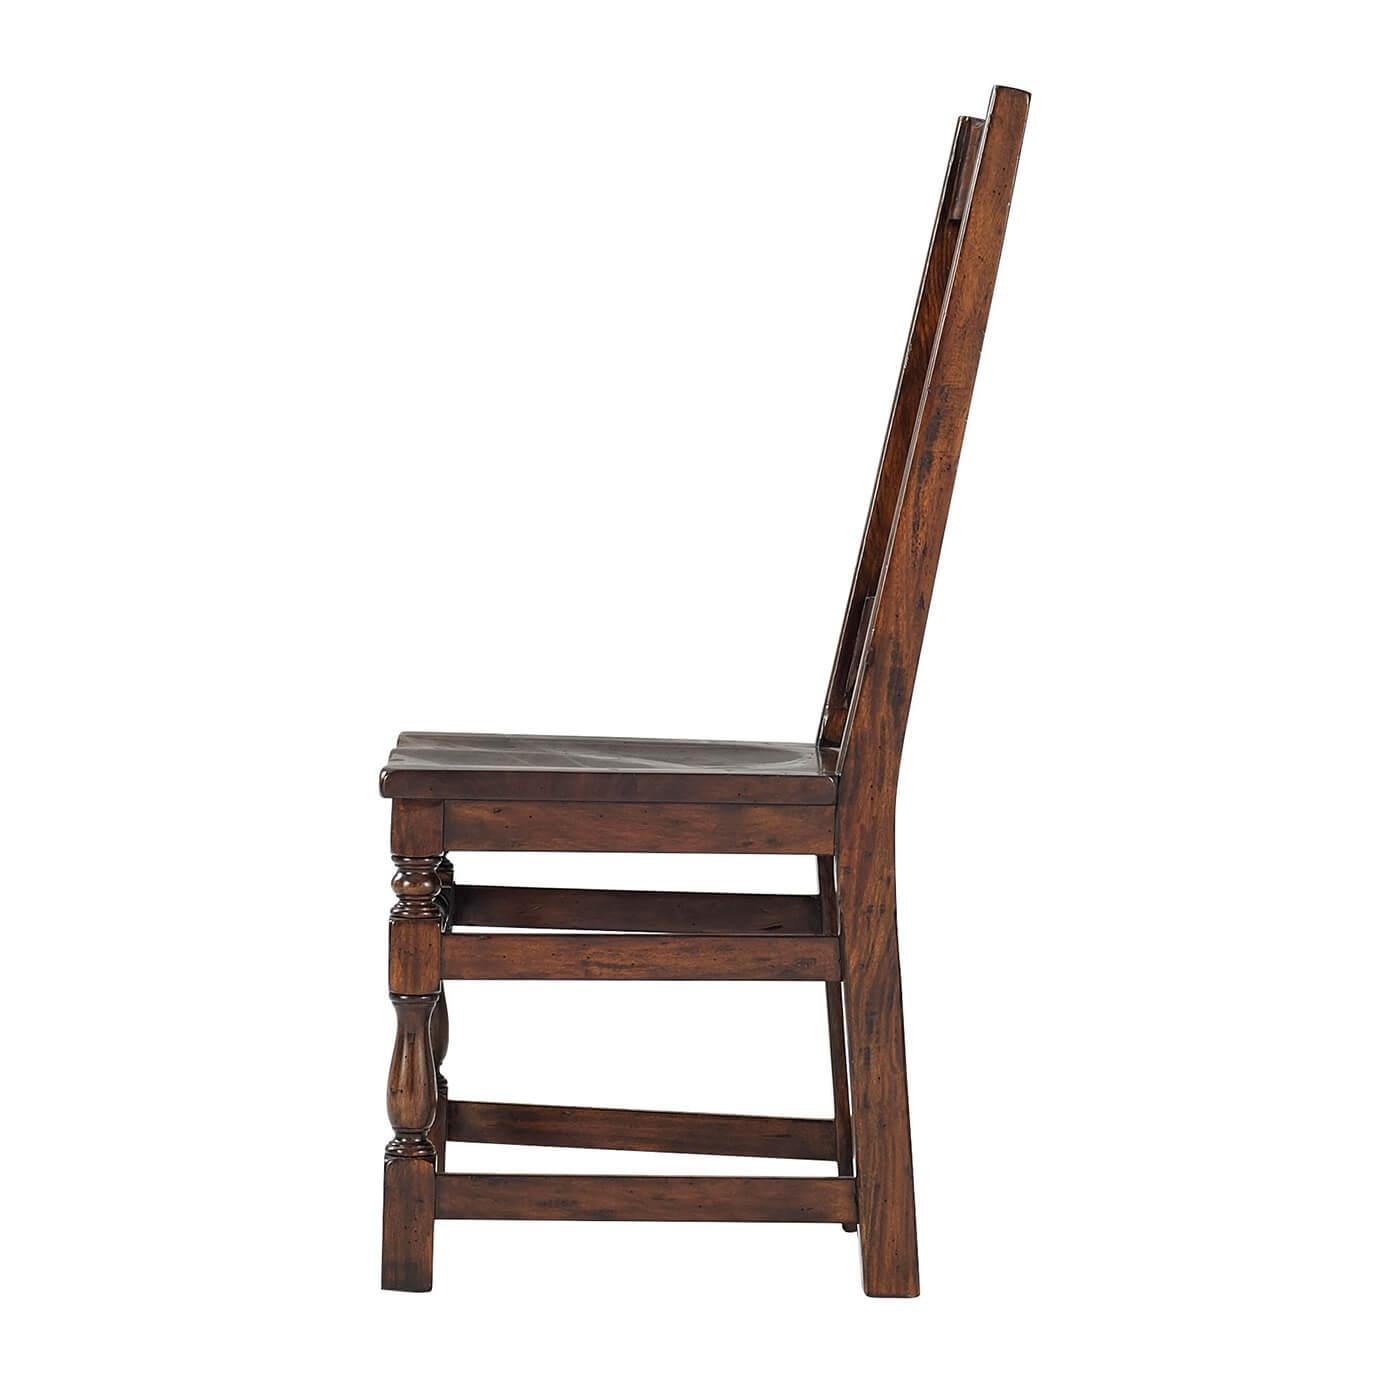 Rustic Early English Style Side Chairs For Sale